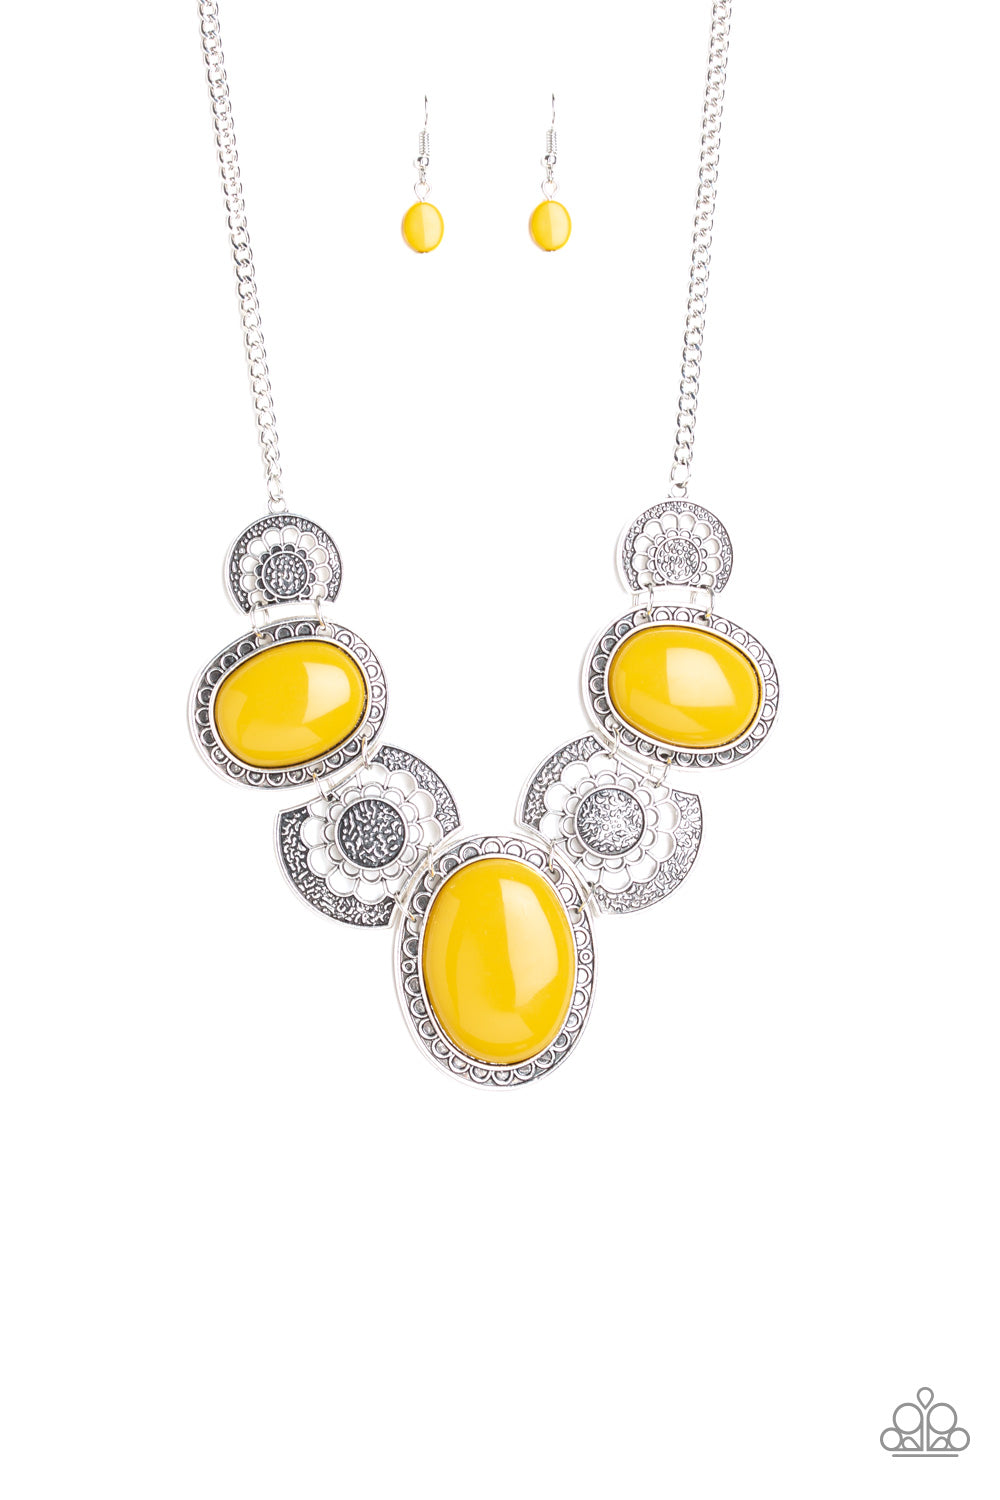 Paparazzi The Medallion-aire Yellow Short Necklace